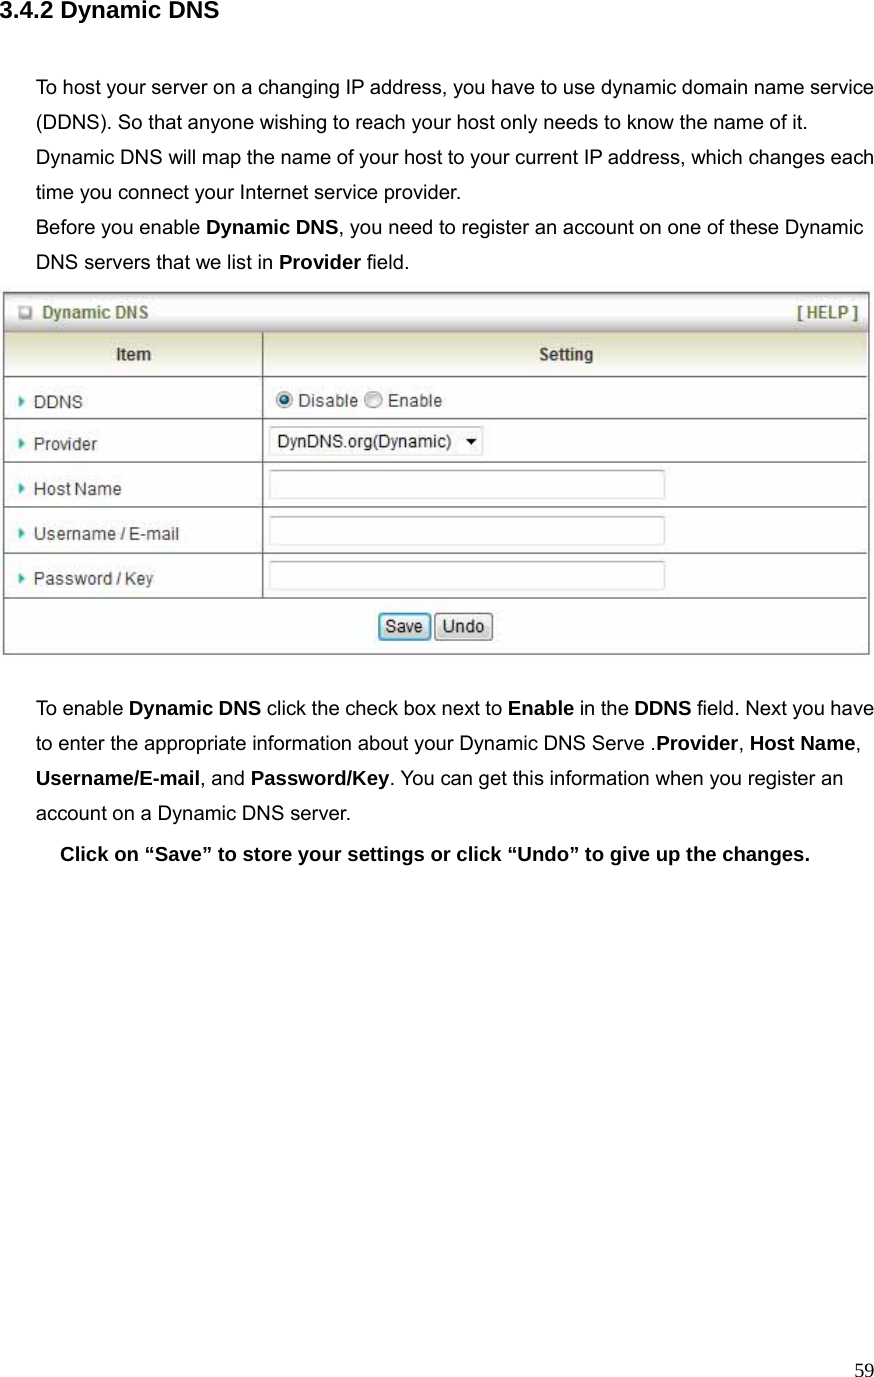  593.4.2 Dynamic DNS   To host your server on a changing IP address, you have to use dynamic domain name service (DDNS). So that anyone wishing to reach your host only needs to know the name of it. Dynamic DNS will map the name of your host to your current IP address, which changes each time you connect your Internet service provider.   Before you enable Dynamic DNS, you need to register an account on one of these Dynamic DNS servers that we list in Provider field.    To enable Dynamic DNS click the check box next to Enable in the DDNS field. Next you have to enter the appropriate information about your Dynamic DNS Serve .Provider, Host Name, Username/E-mail, and Password/Key. You can get this information when you register an account on a Dynamic DNS server. Click on “Save” to store your settings or click “Undo” to give up the changes.                 